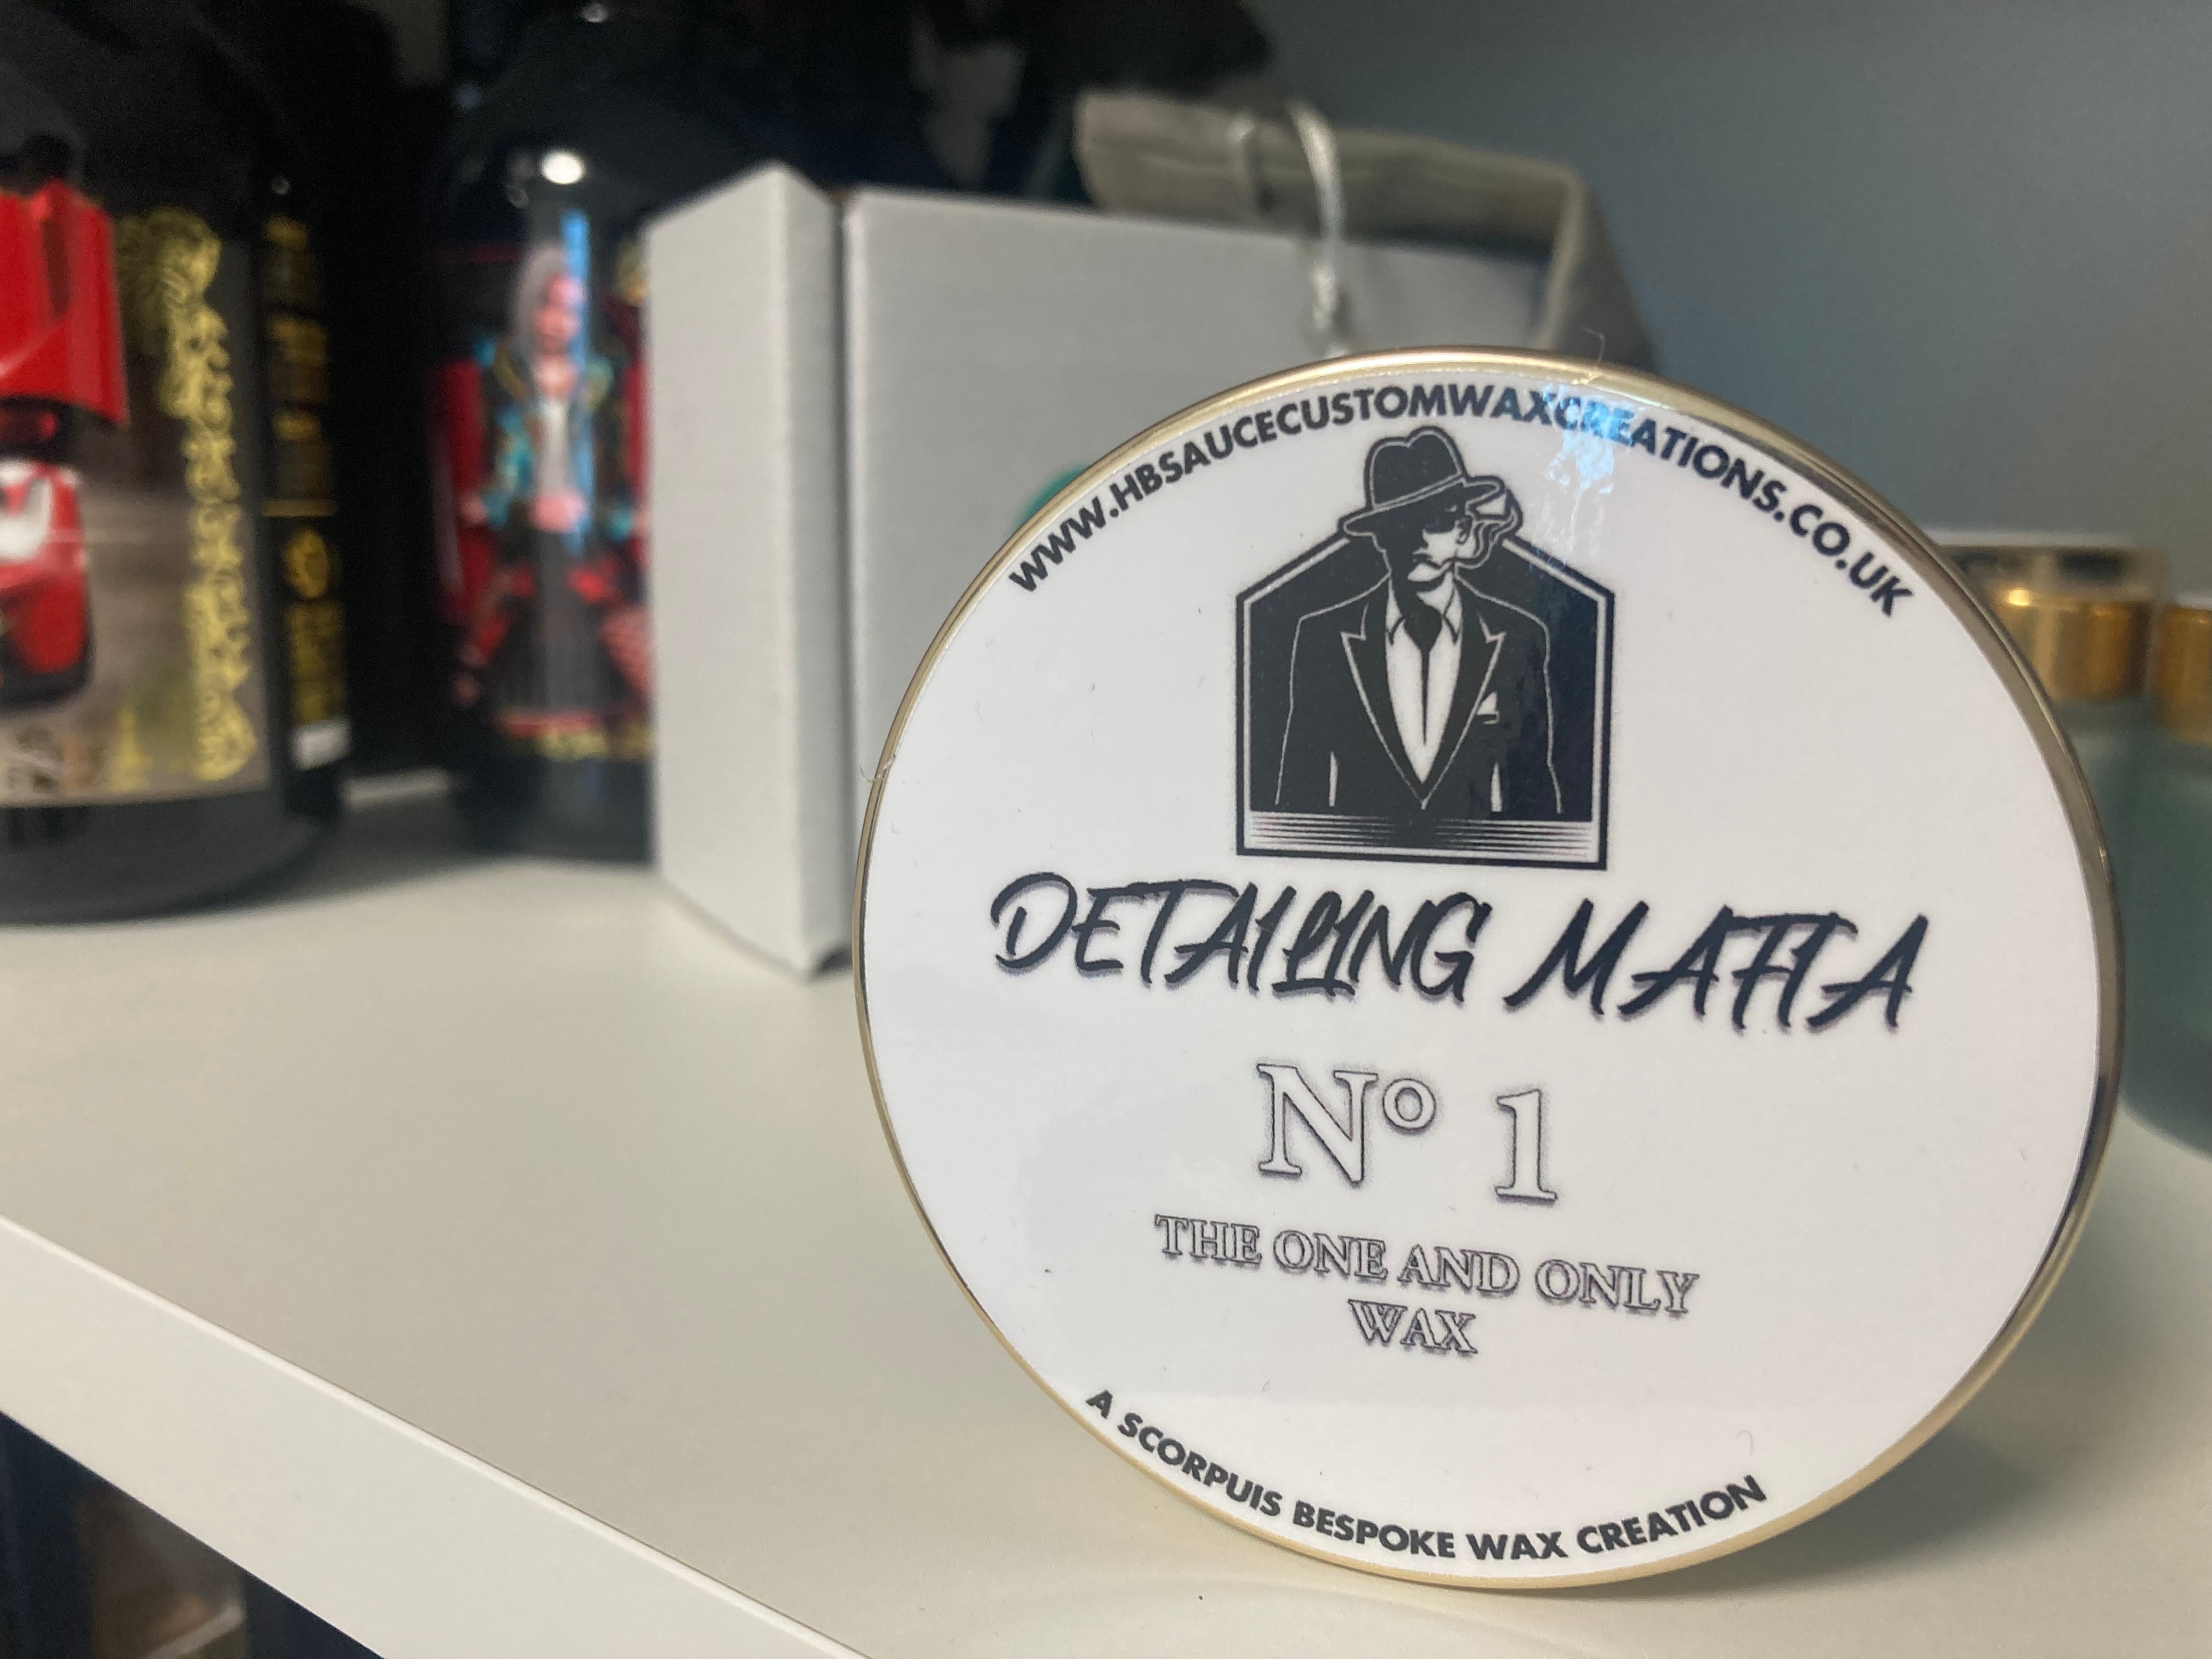 Detailing Mafia N°1 one and only ceramic wax100ml | Detailer's Choice